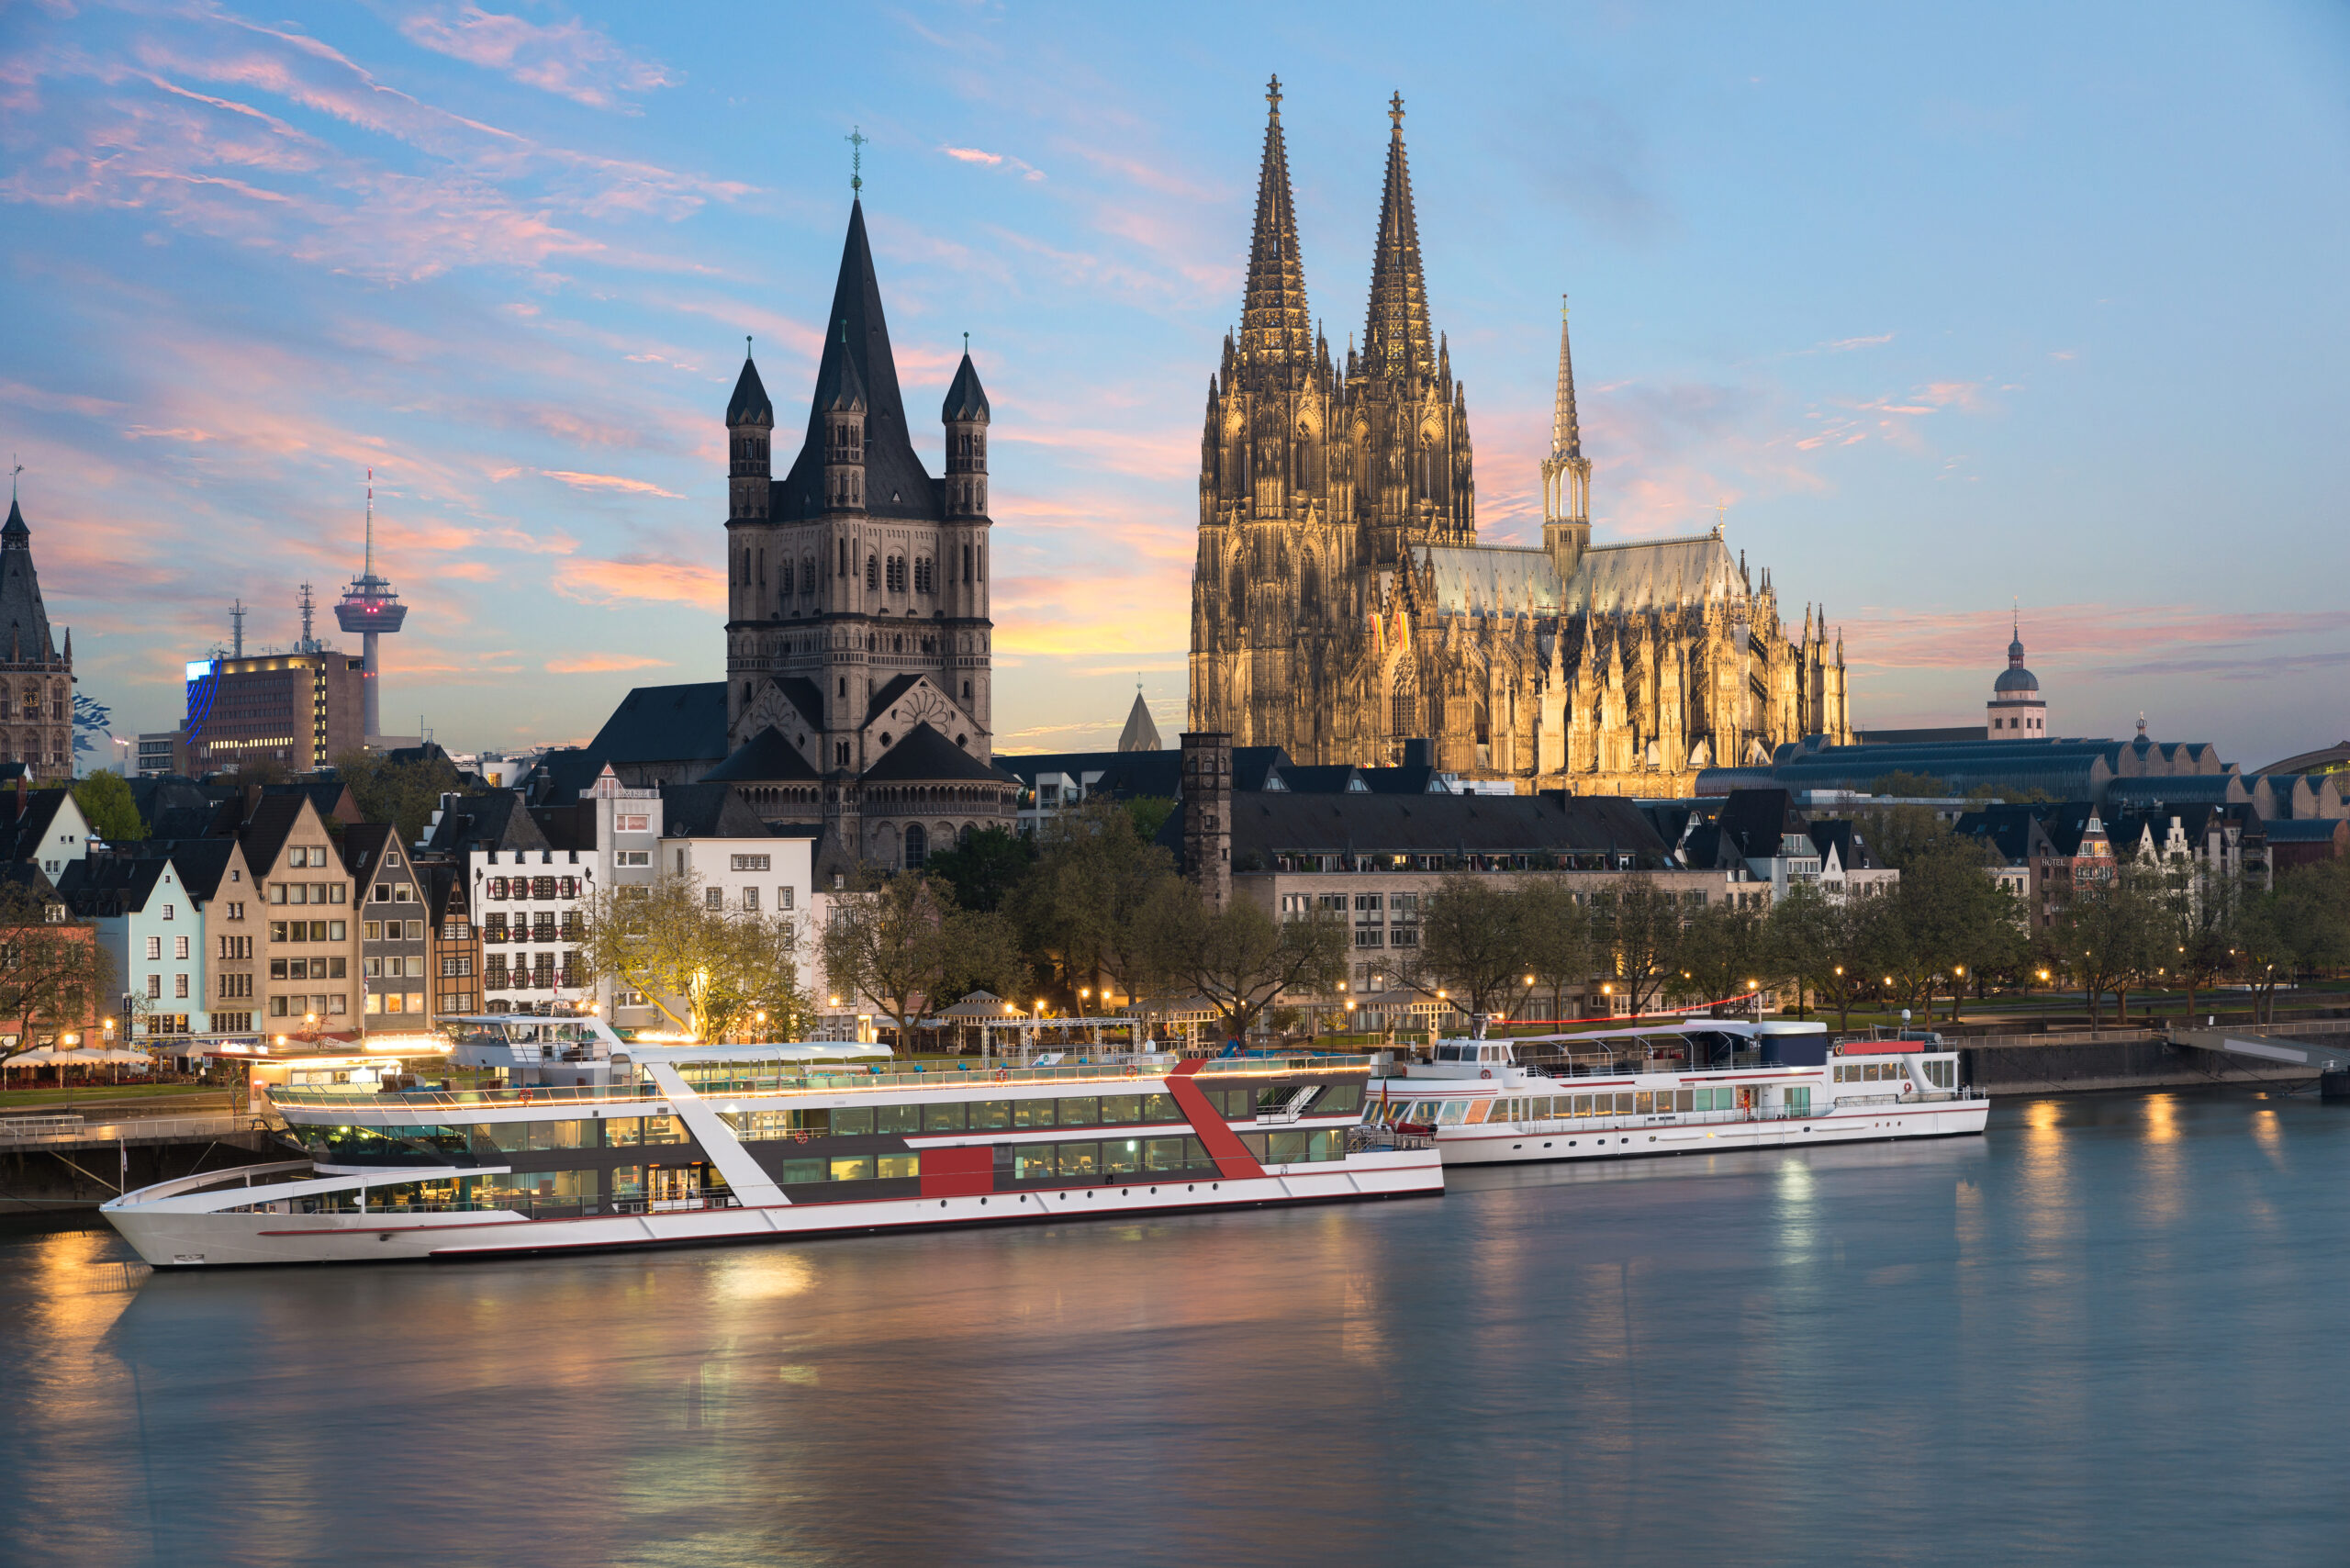 The Elbe is a great alternative river destination